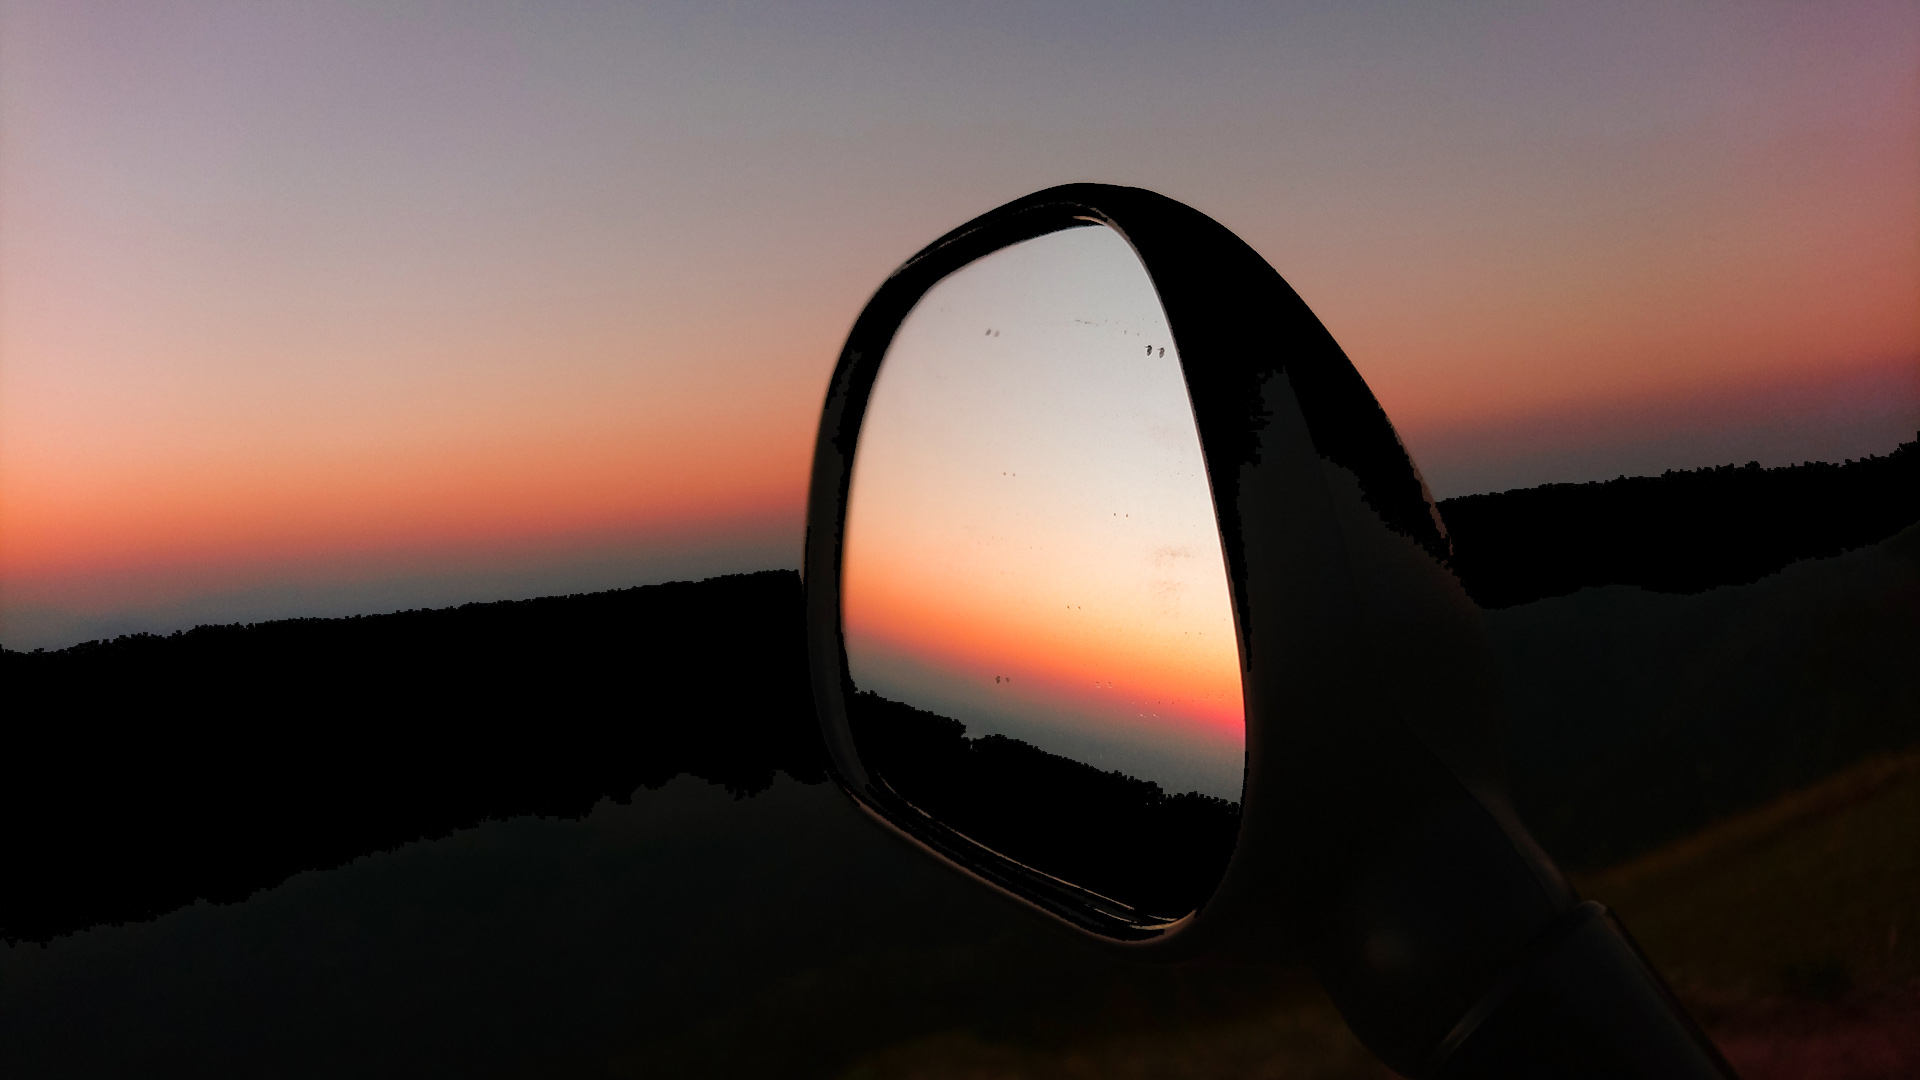 Sunset in the rearview mirror